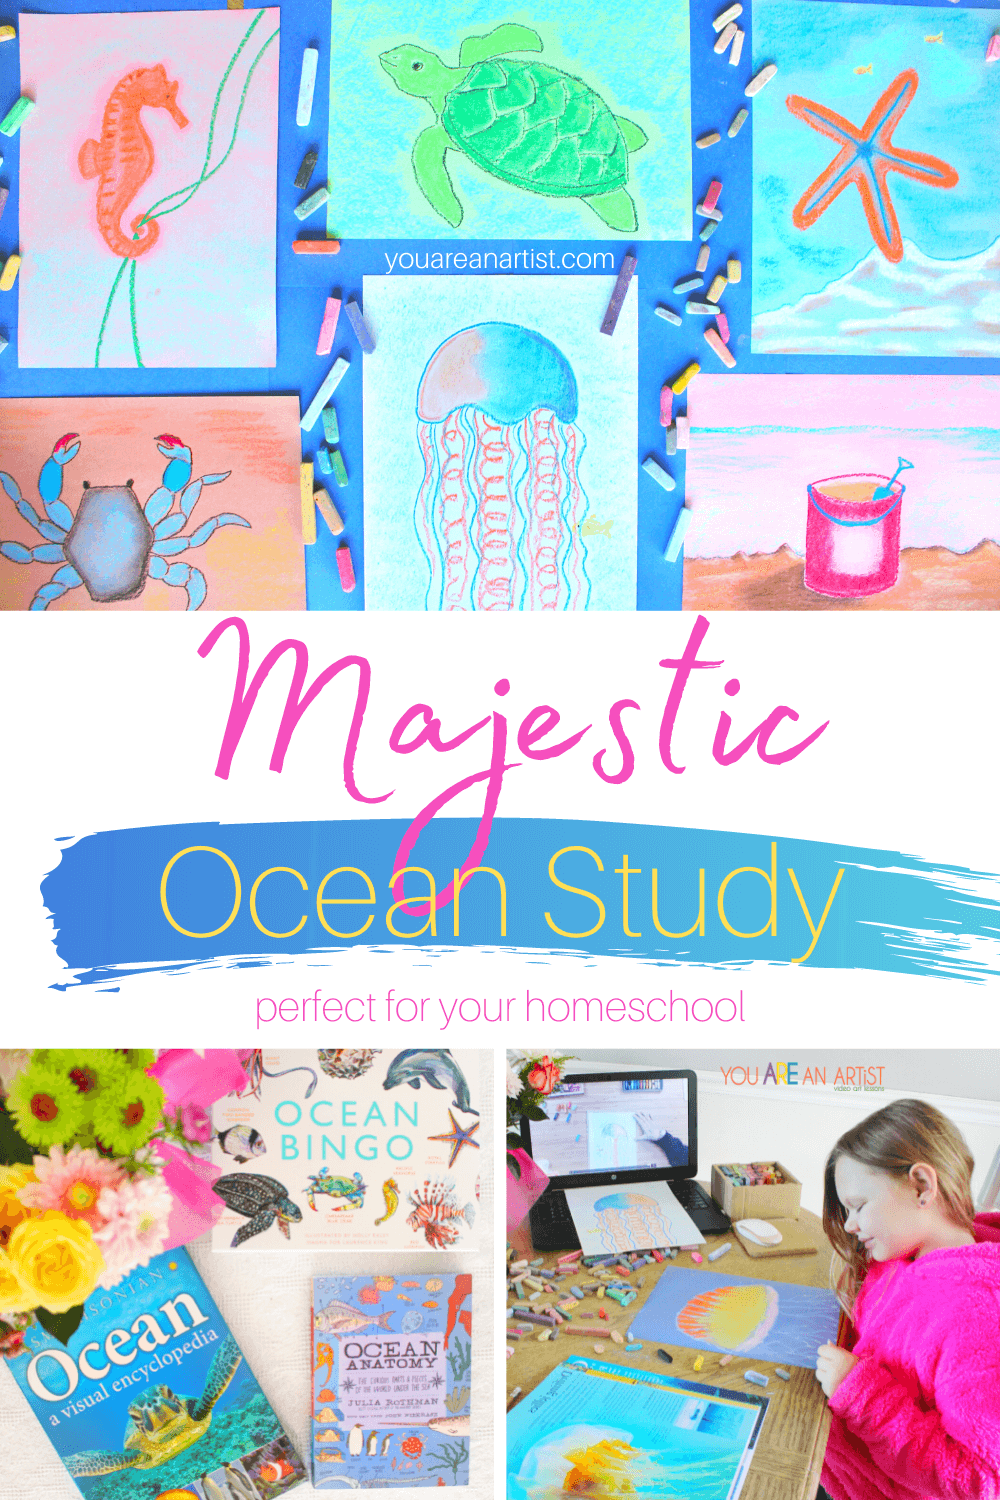 A Majestic Ocean Study Perfect For Your Homeschool: Take your kids on an ocean study under the sea and up on shore with a combination of books and art to spark the imagination! #oceanstudy #naturestudy #seashoreart #oceanography #homeschool #youareanartist